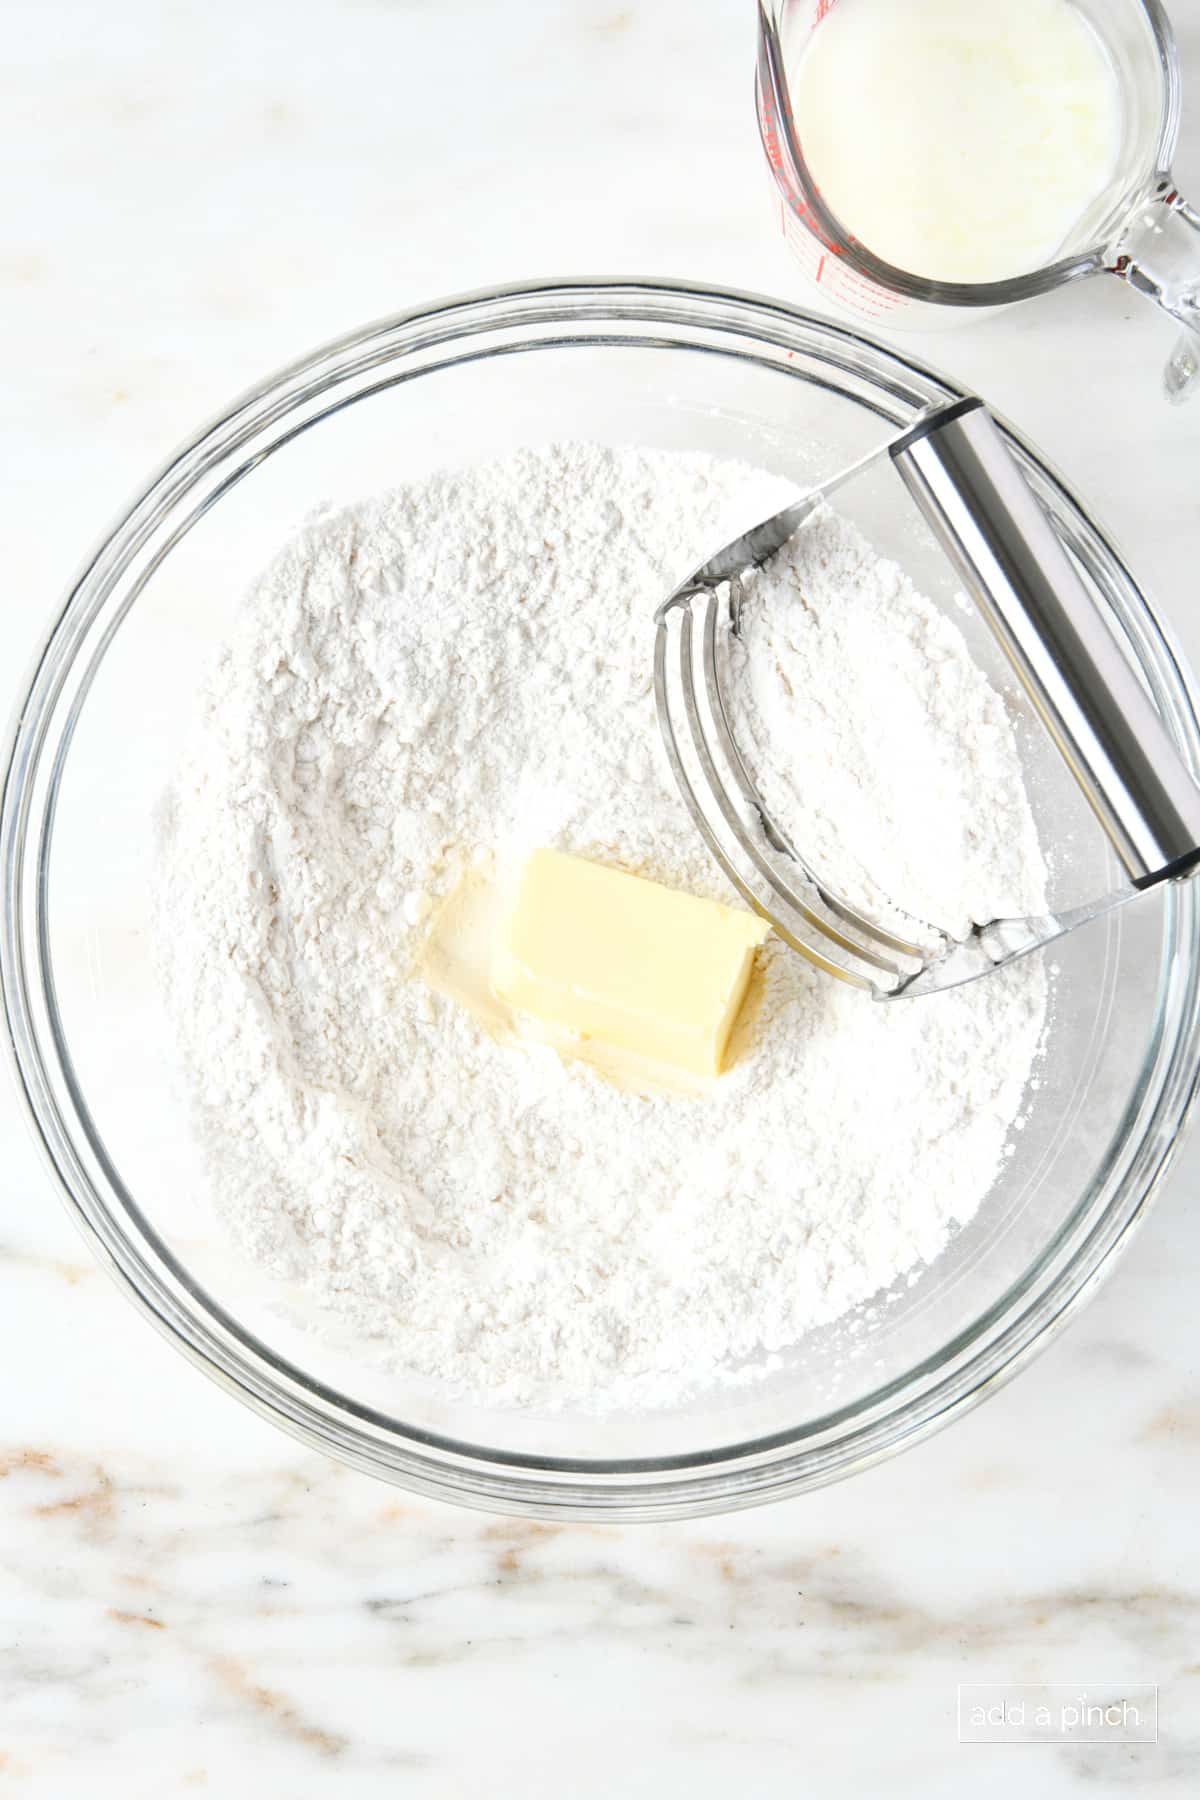 Self-rising flour and butter in a glass mixing bowl with a pastry blender.